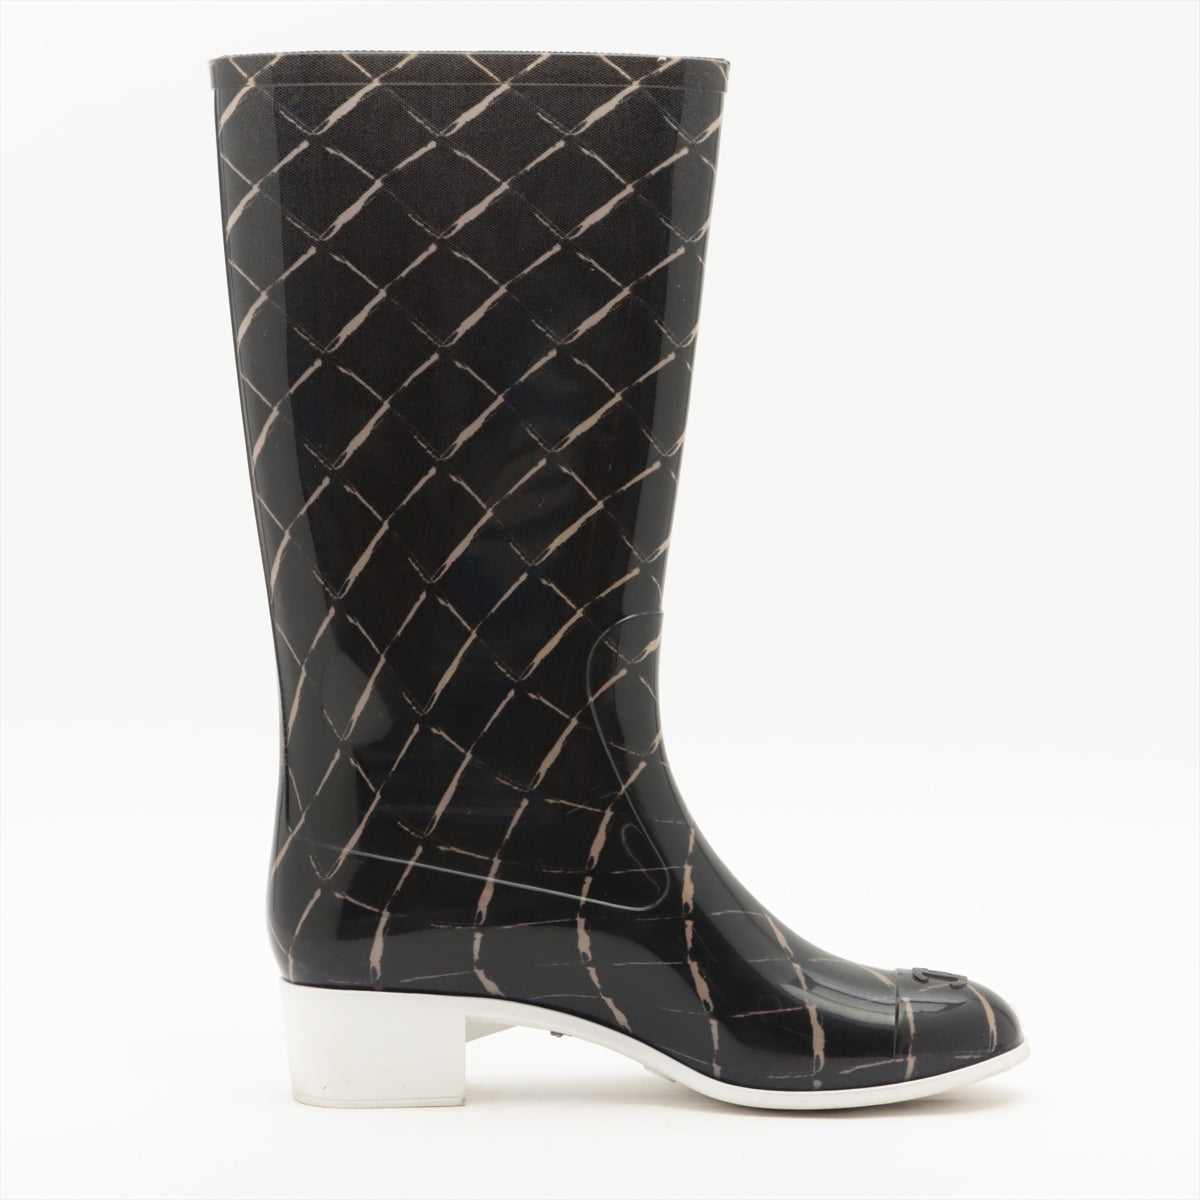 Chanel Coco Mark Rubber Rain boots 35 Ladies' black x beige upper insoles There is dirt on the heel